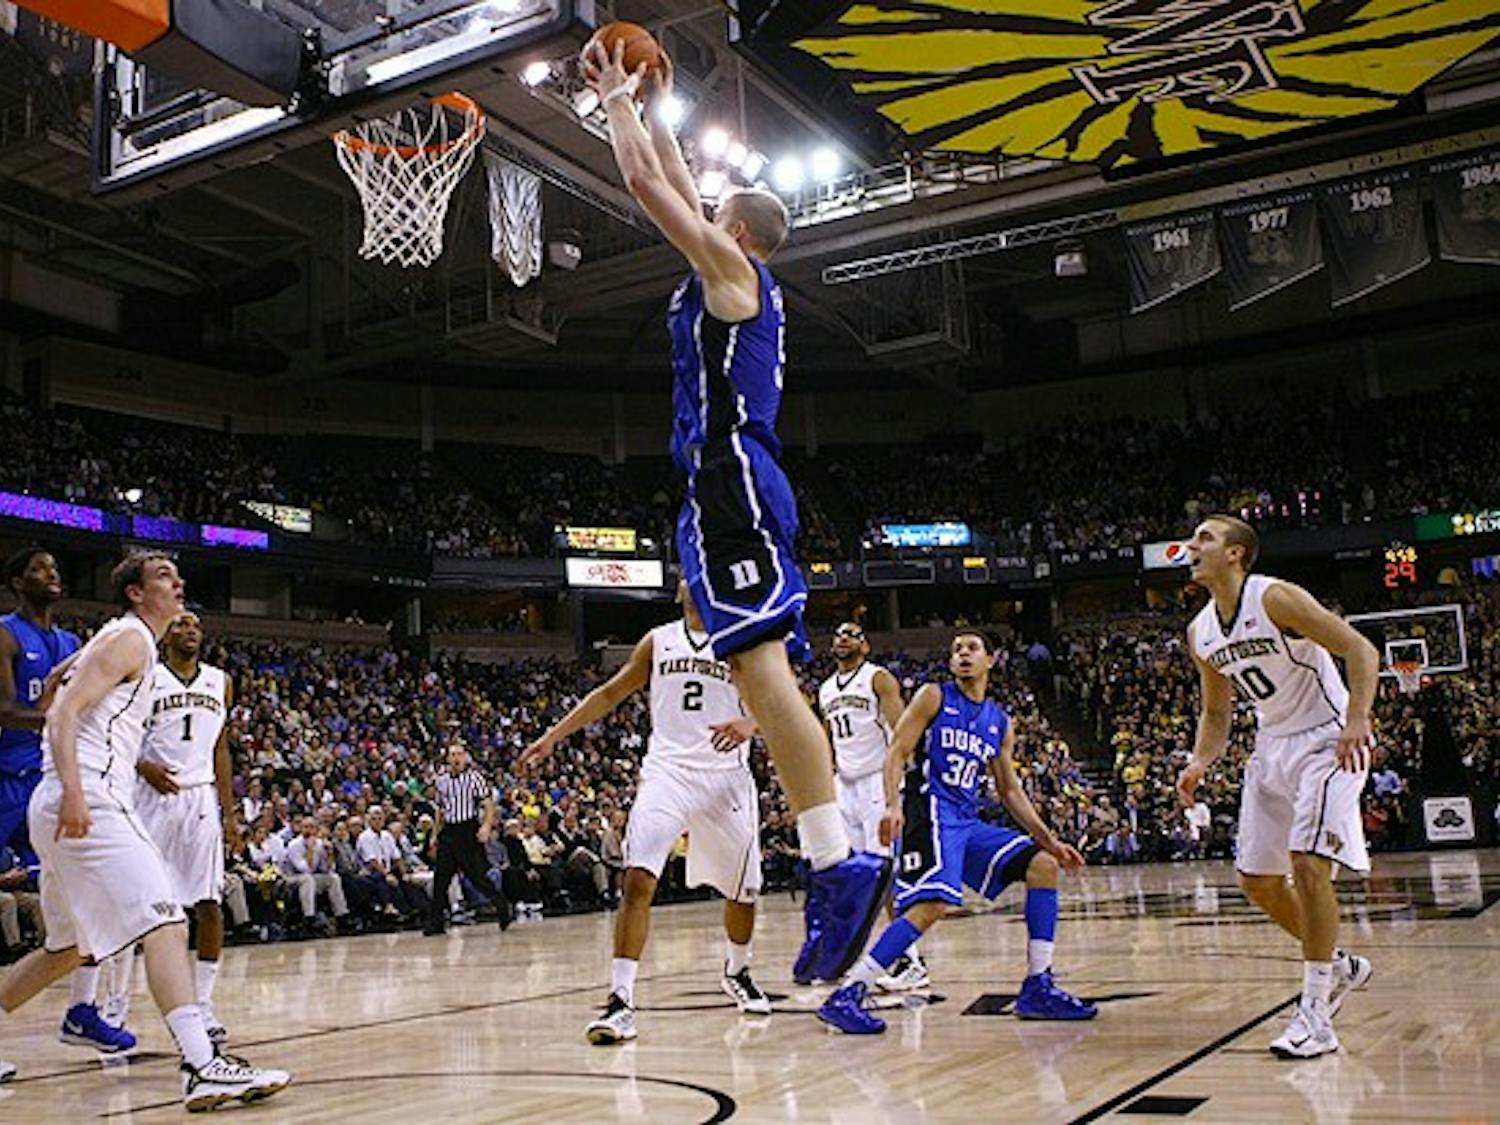 Senior Mason Plumlee scored a career-high 32 points and added 9 rebounds in Duke's win over Wake Forest.